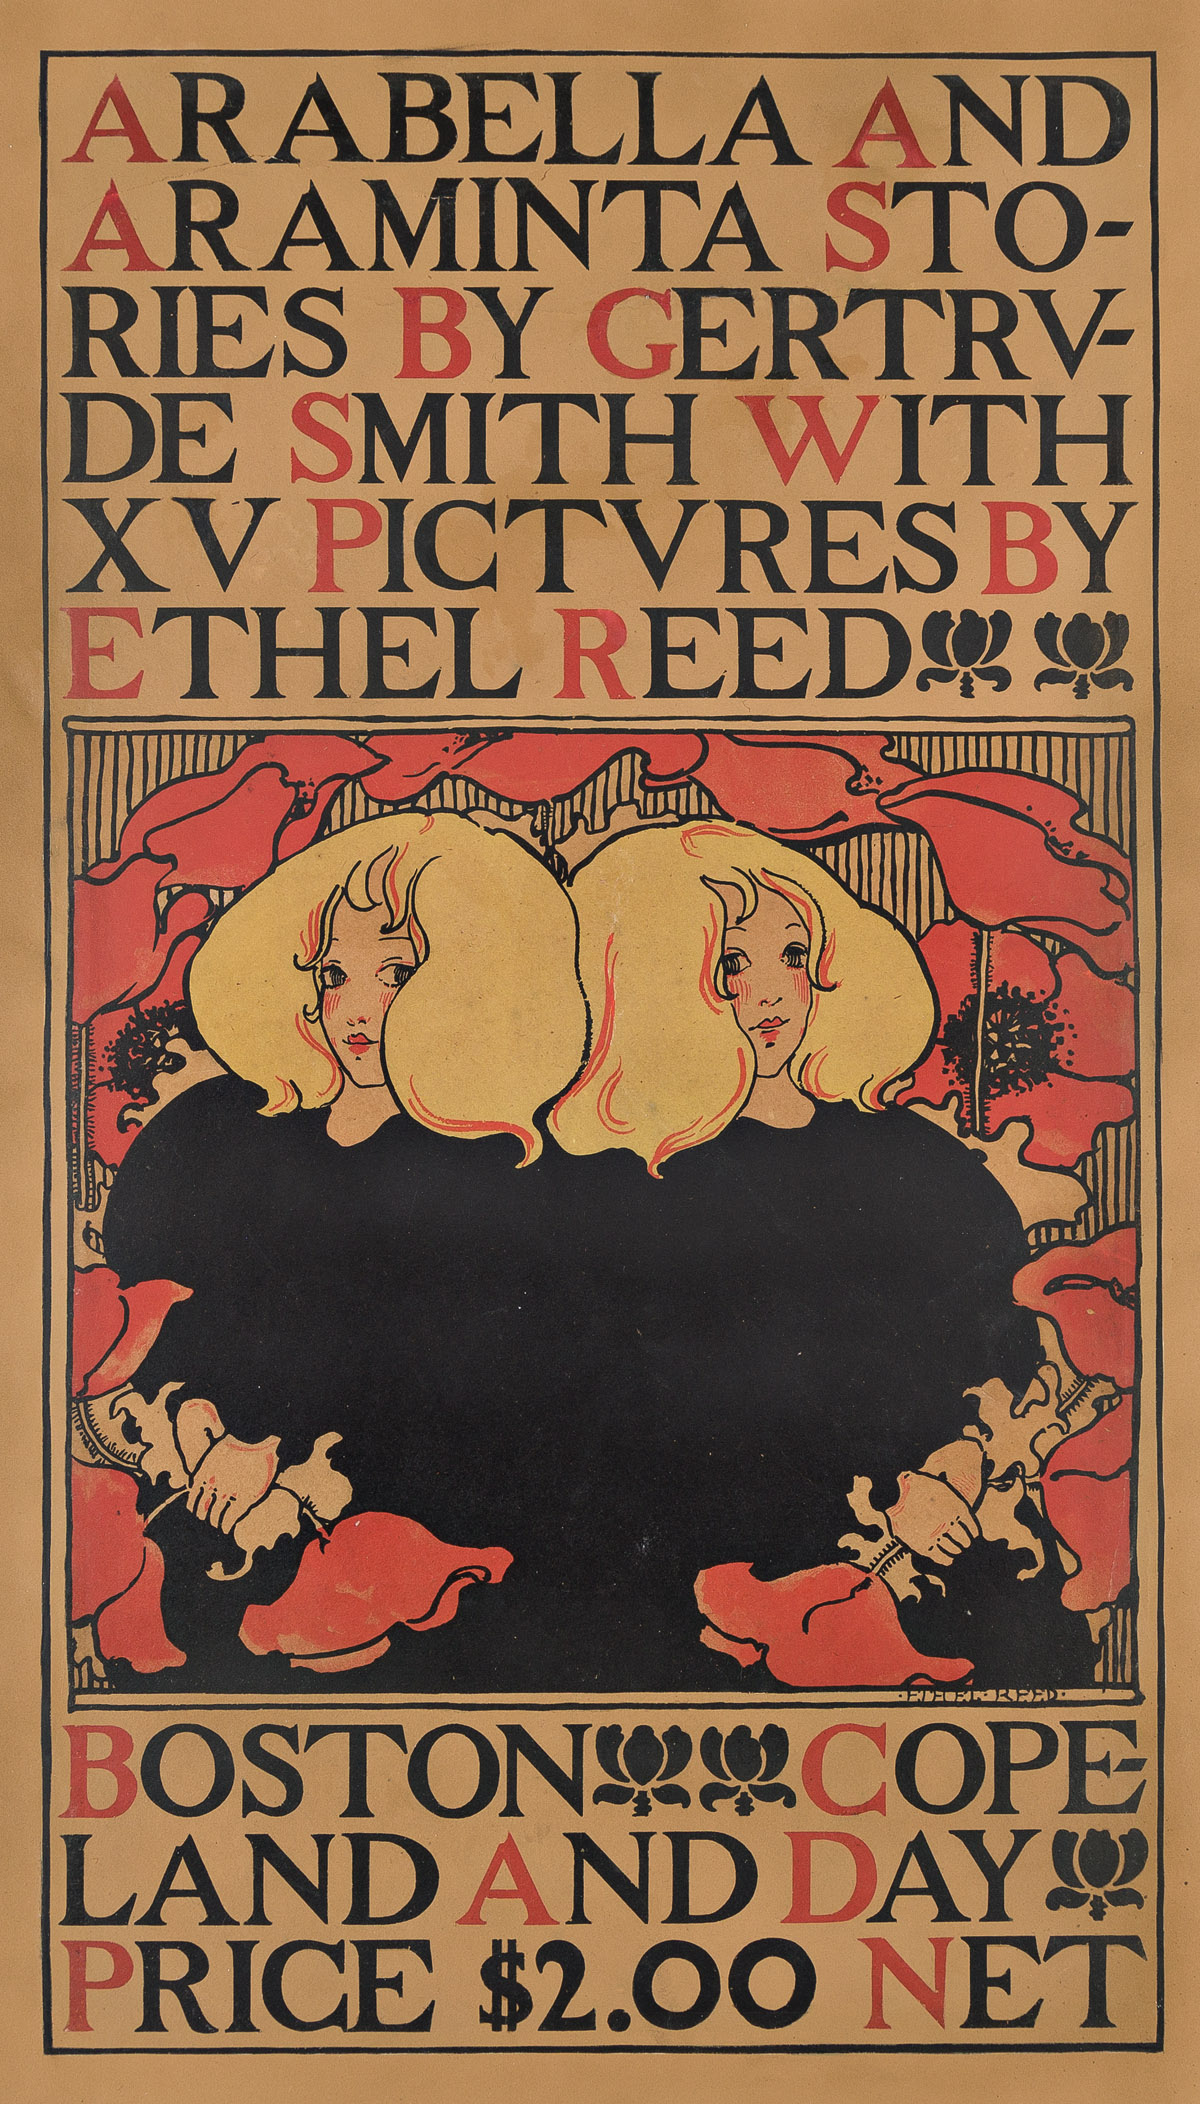 Reed, Ethel (1874-1912) illus.; Gertrude Smith. Arabella and Araminta Stories, Book and Poster.